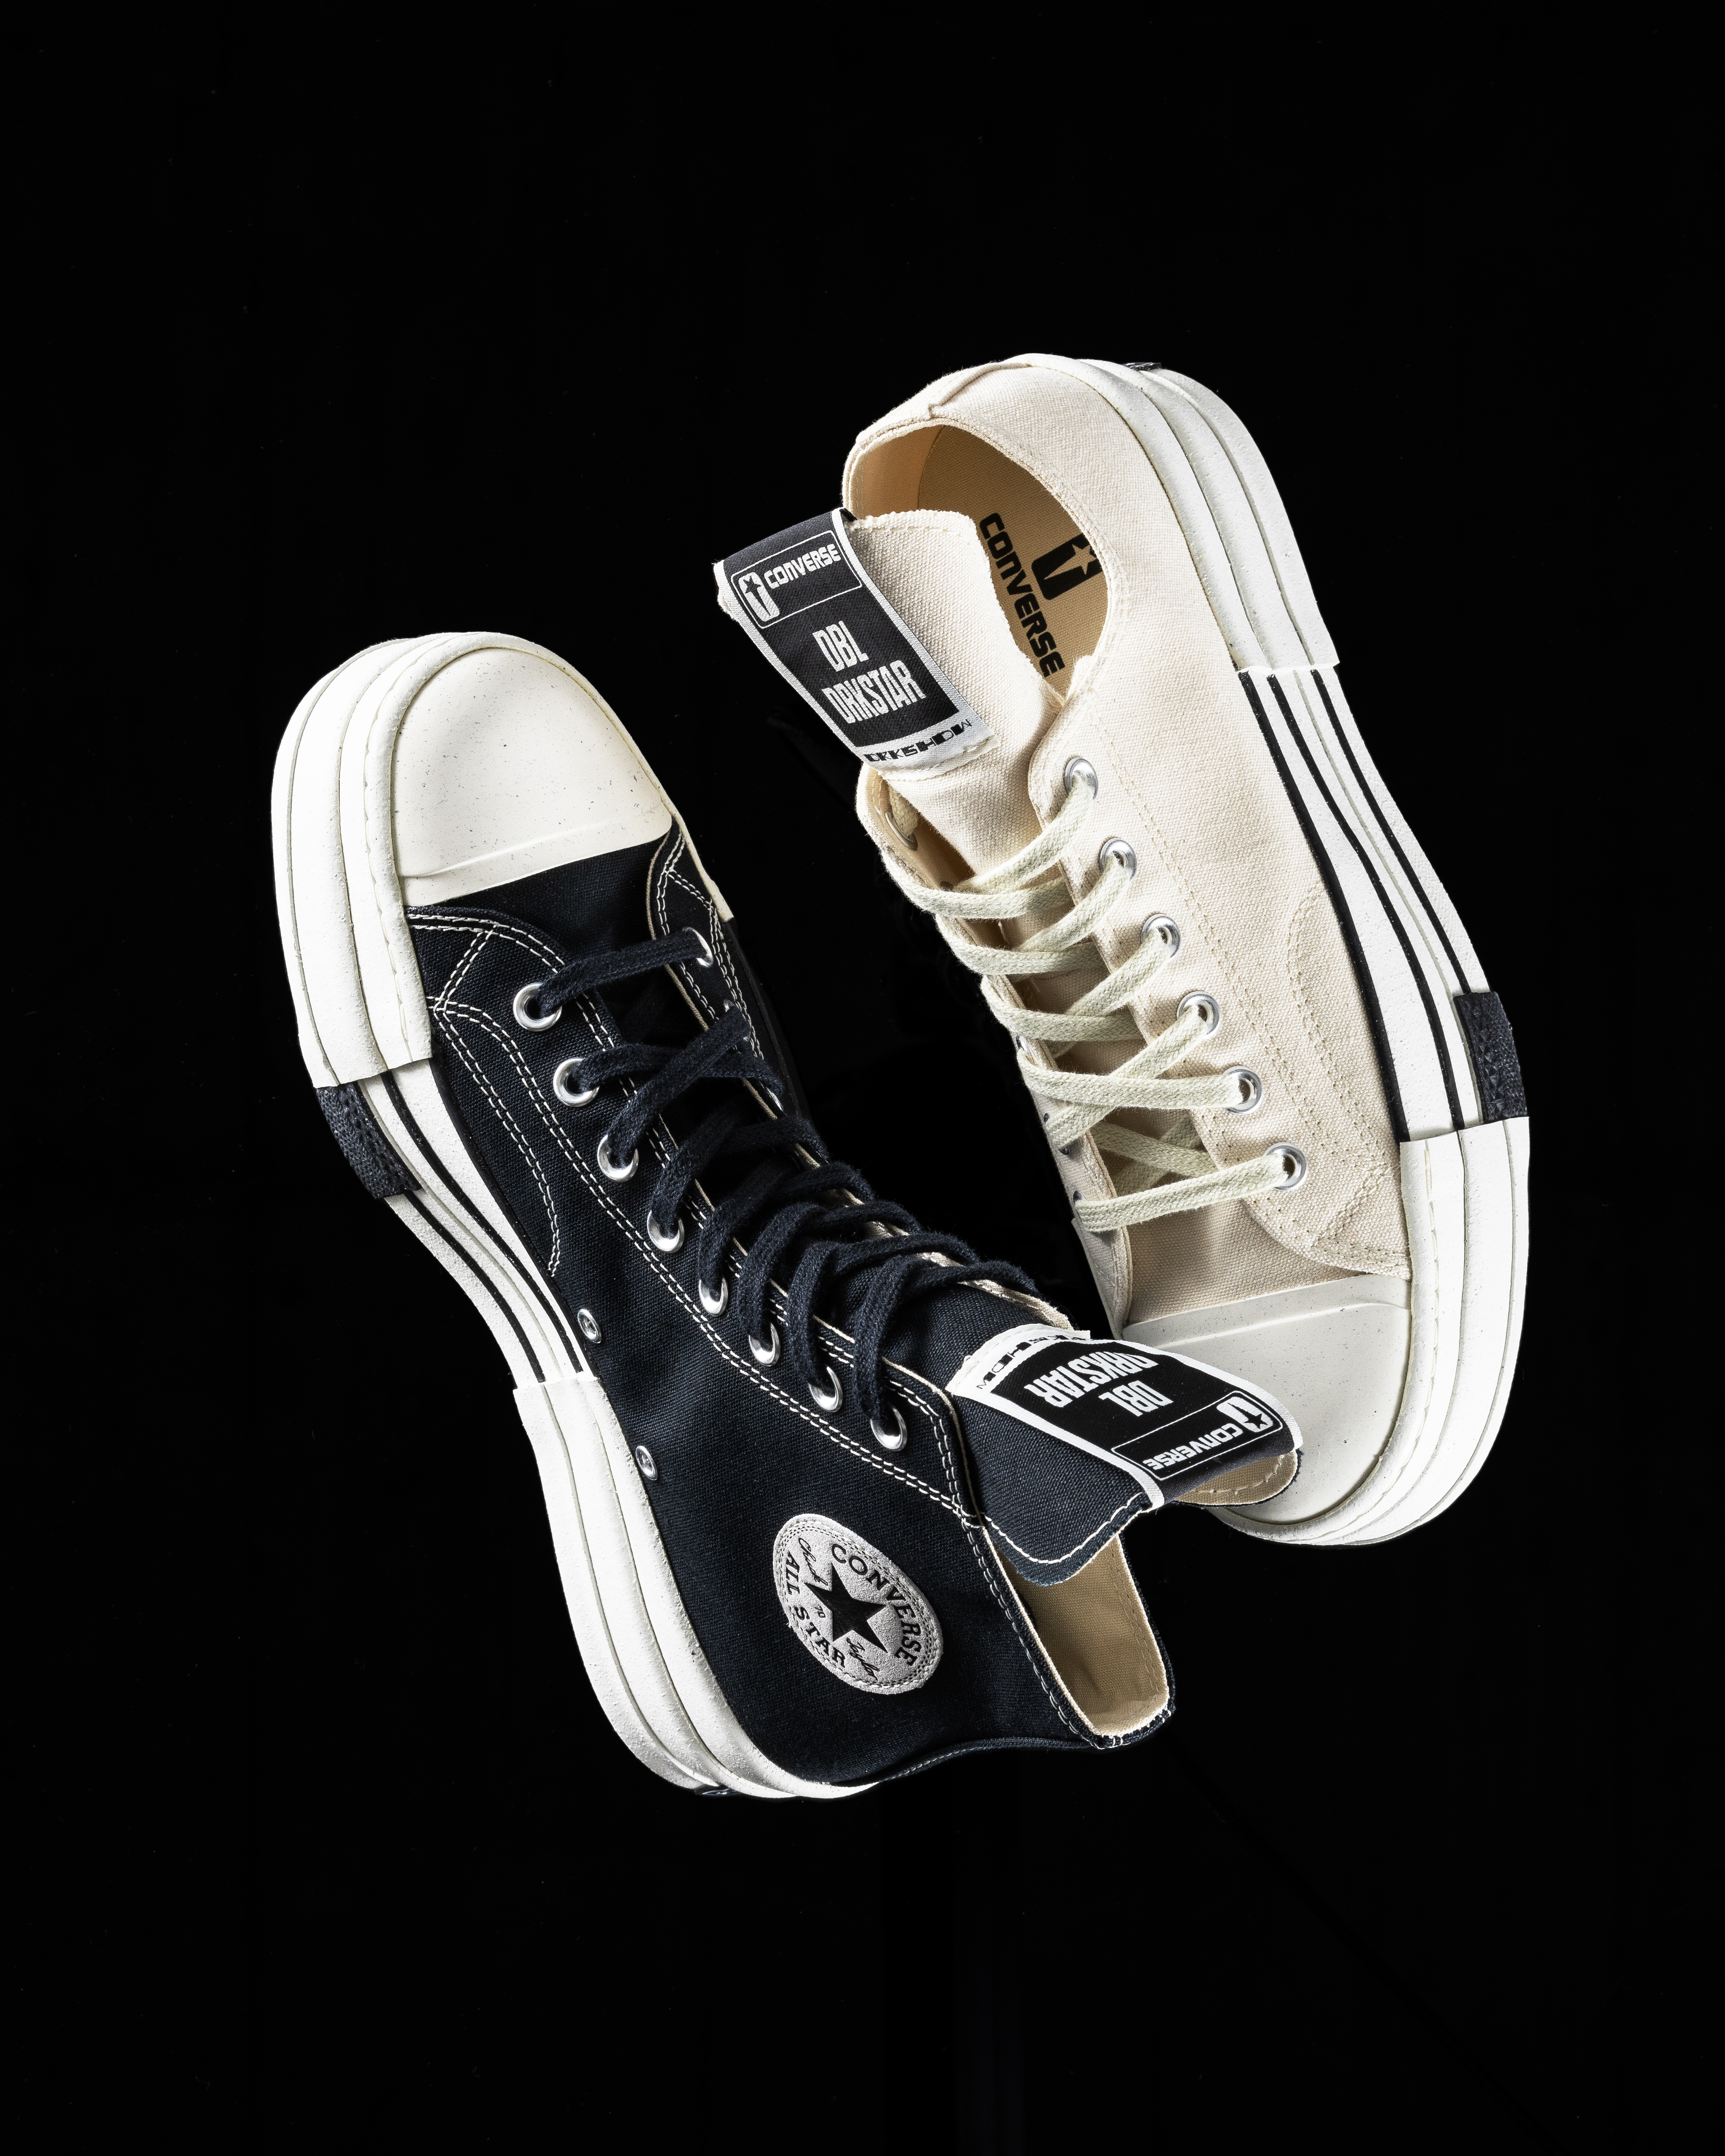 Rick Owens & Converse Introduce Extra Stacked DBL DRKSTAR